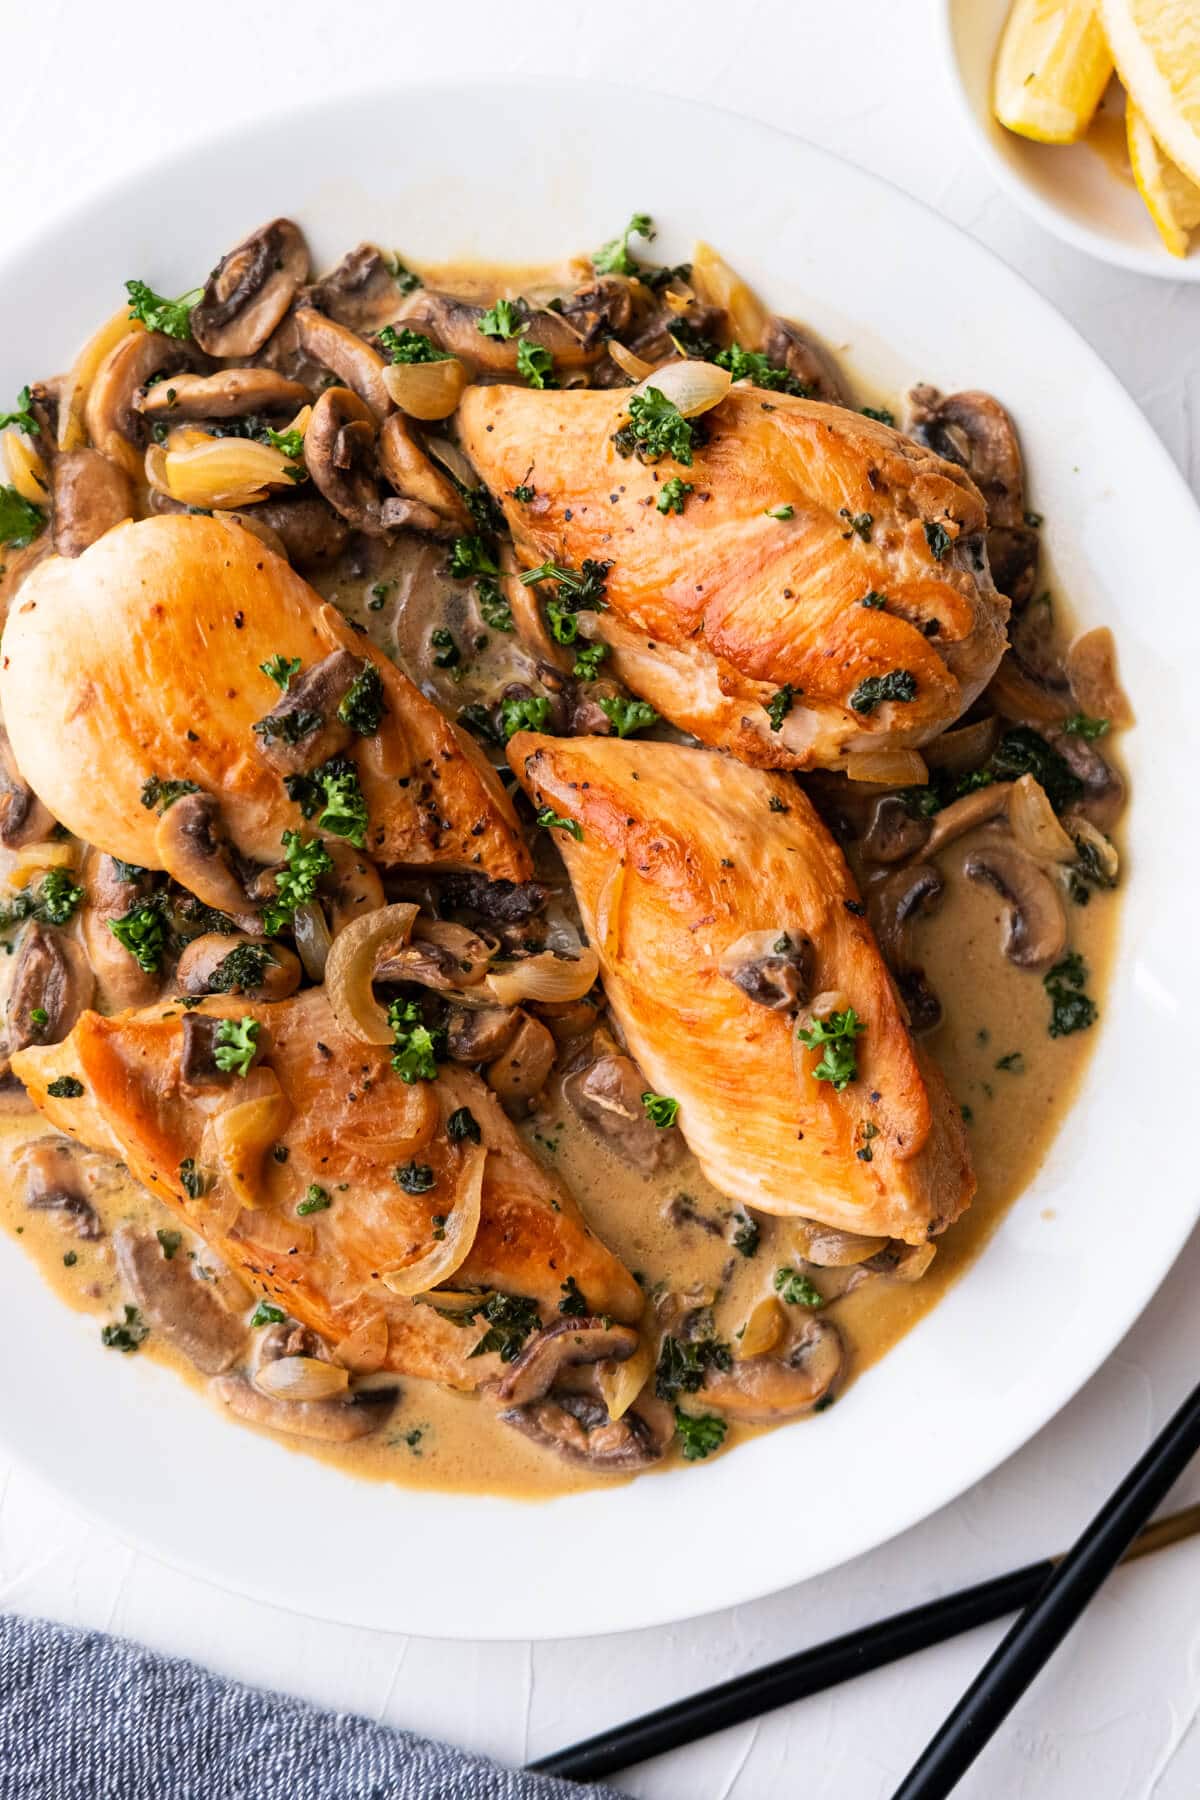 Chicken diane yields seared chicken breasts in a creamy Diane sauce and garnish with freshly chopped parsley.